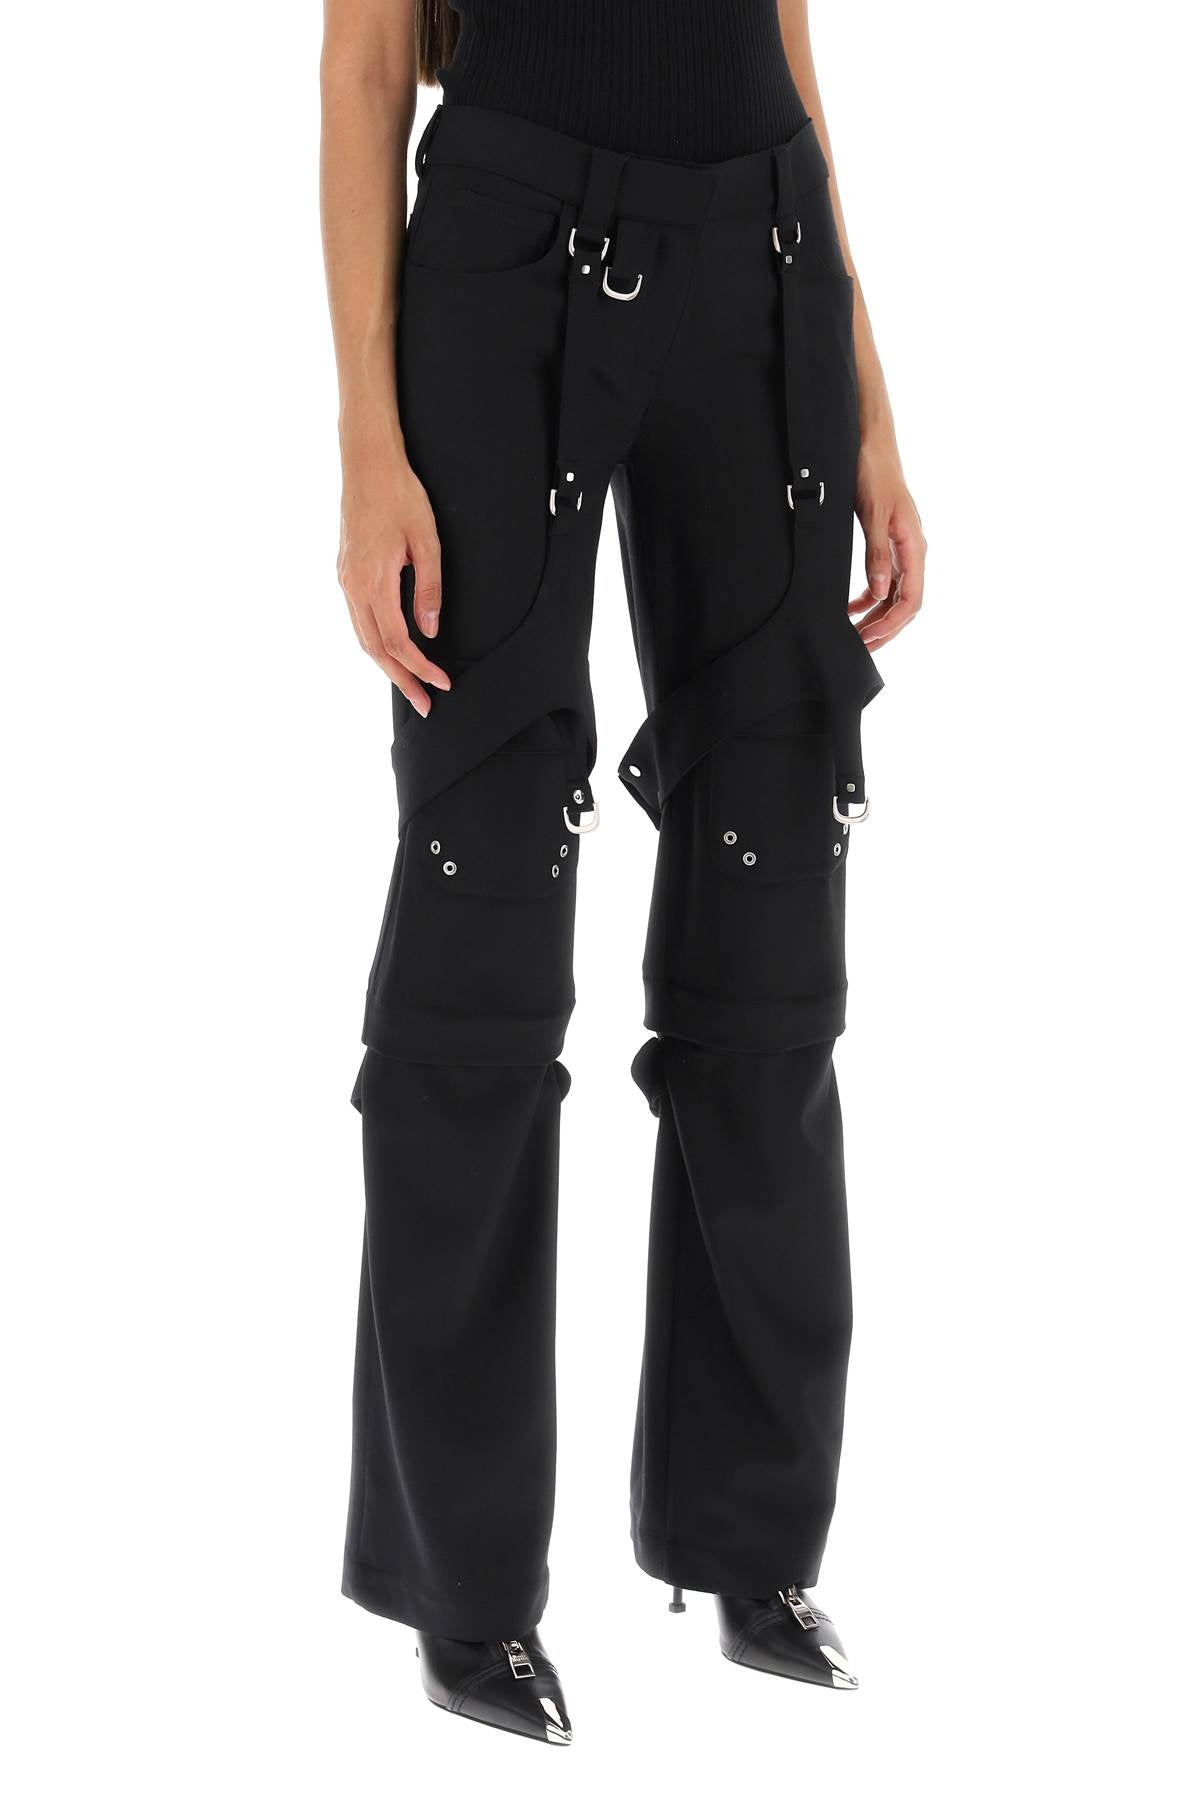 Off-White Off-white cargo pants in wool blend